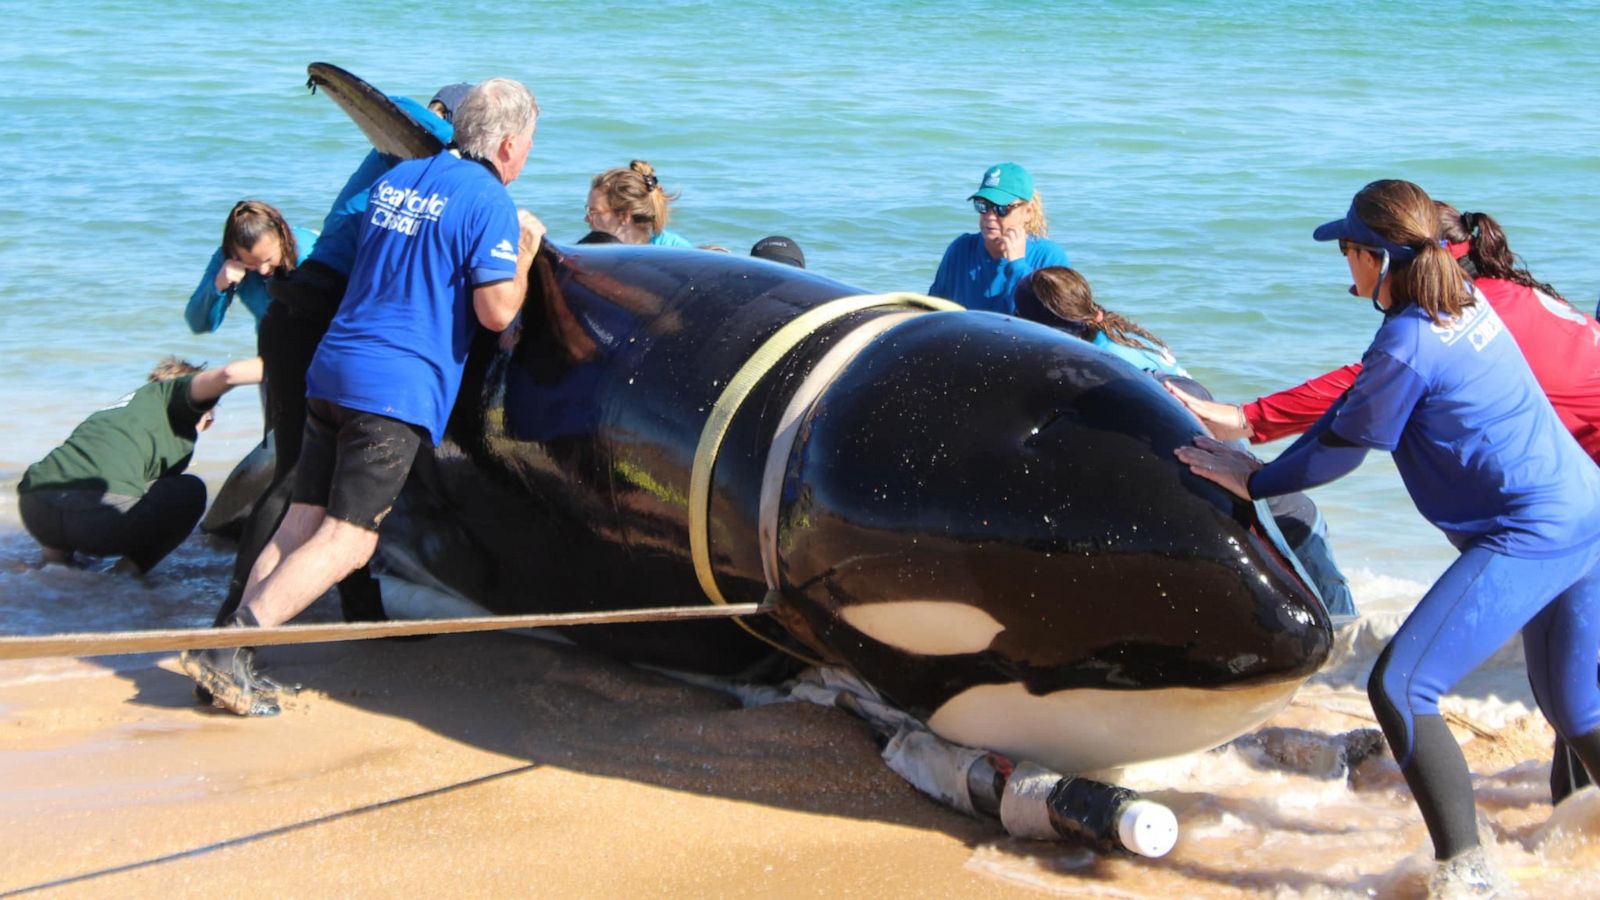 21-foot killer whale dies after beaching itself on Florida coast - ABC News